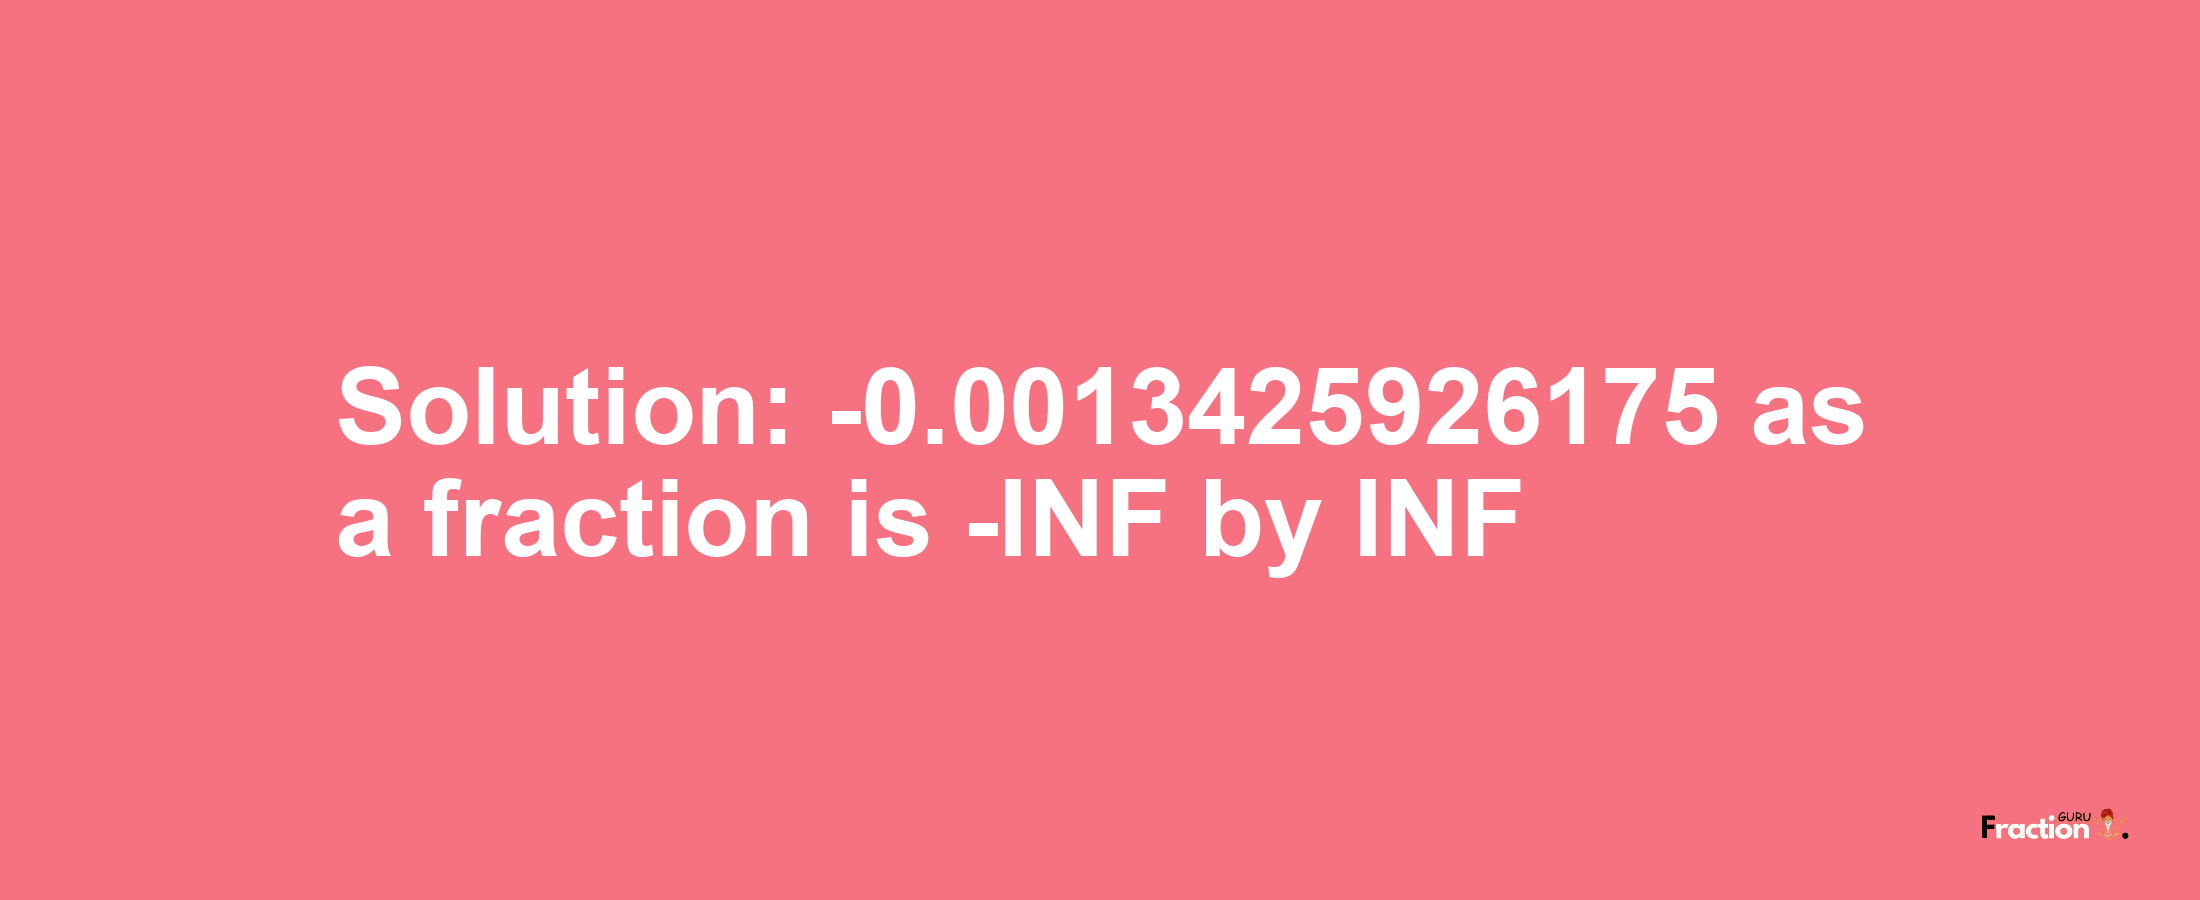 Solution:-0.0013425926175 as a fraction is -INF/INF